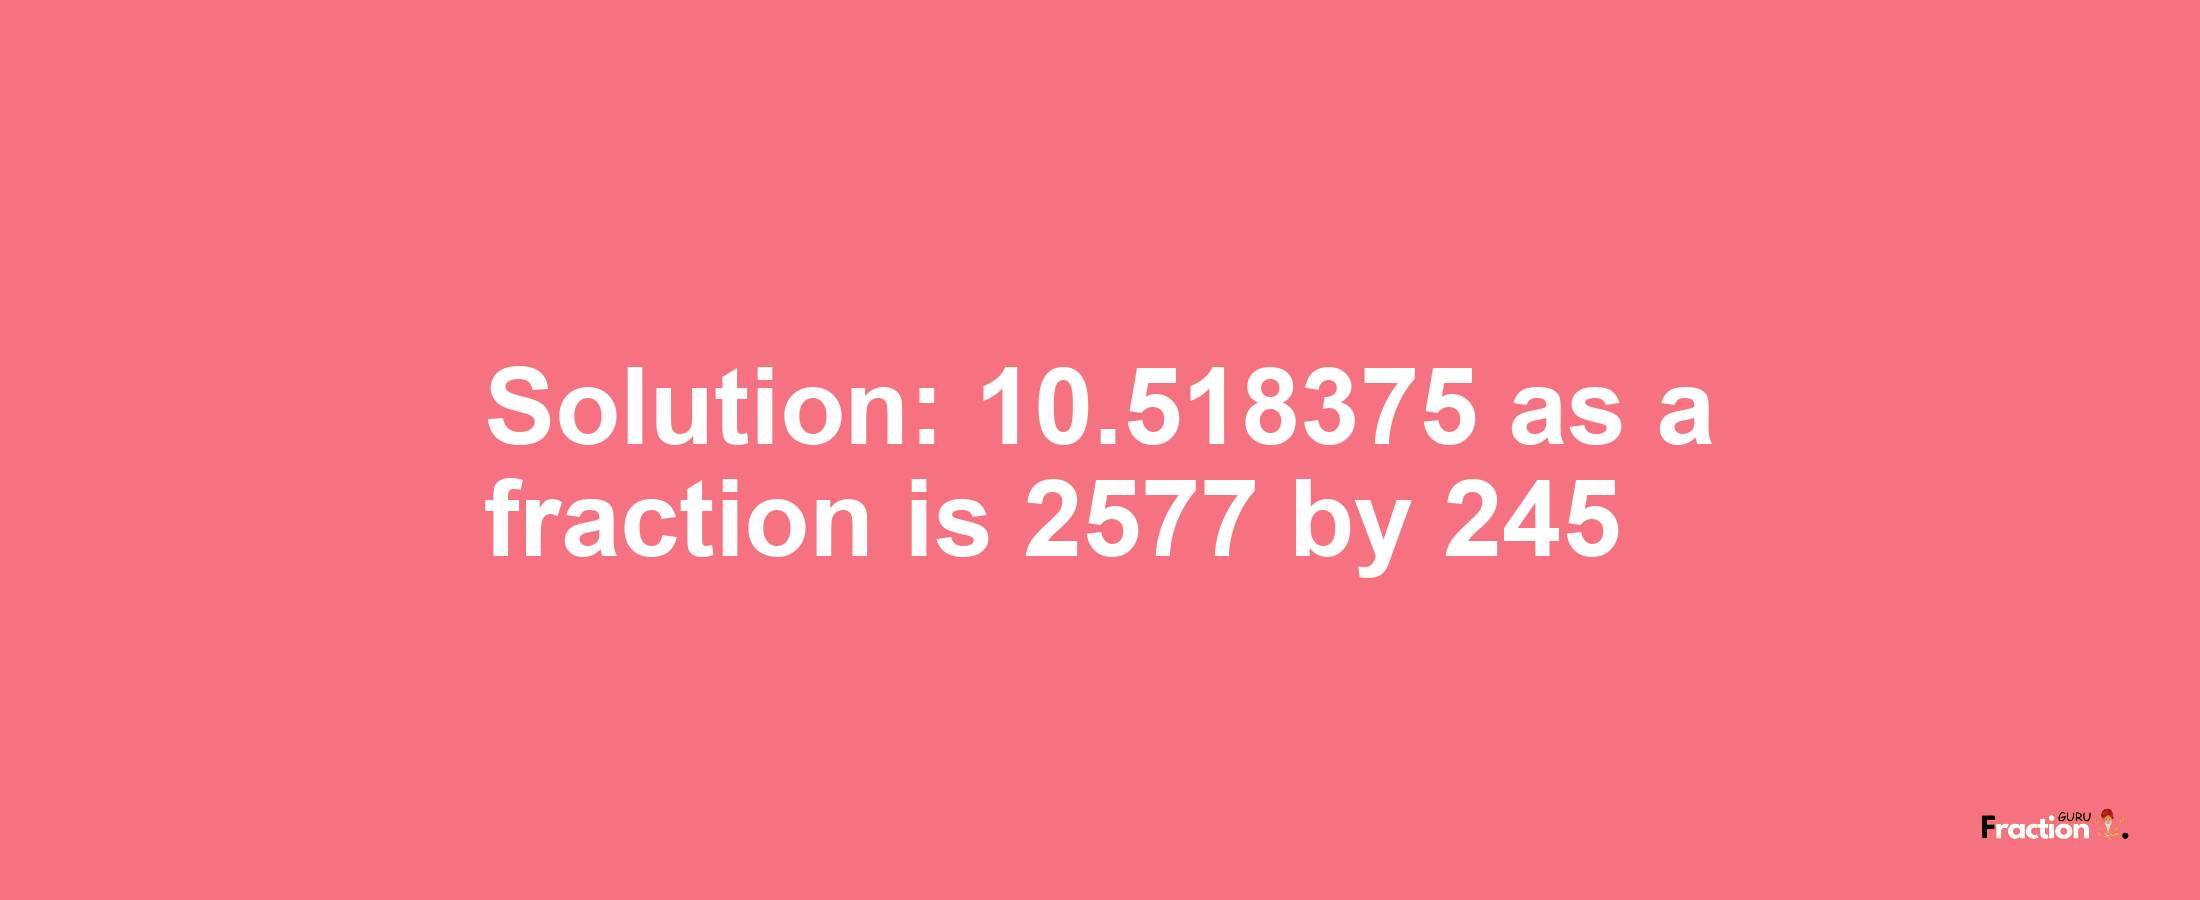 Solution:10.518375 as a fraction is 2577/245